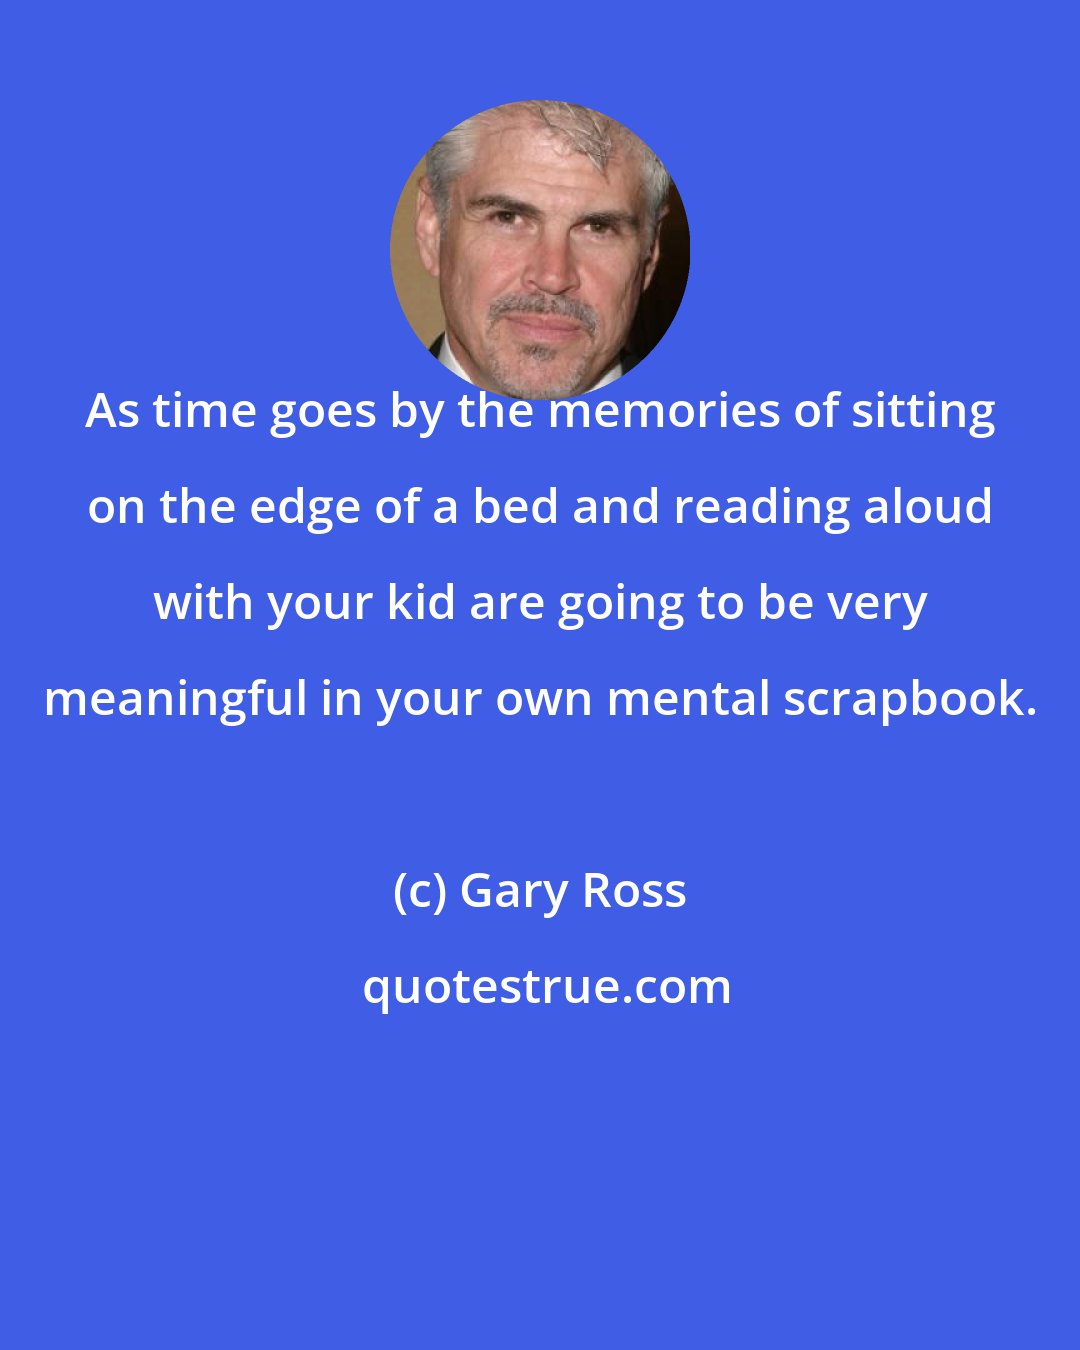 Gary Ross: As time goes by the memories of sitting on the edge of a bed and reading aloud with your kid are going to be very meaningful in your own mental scrapbook.